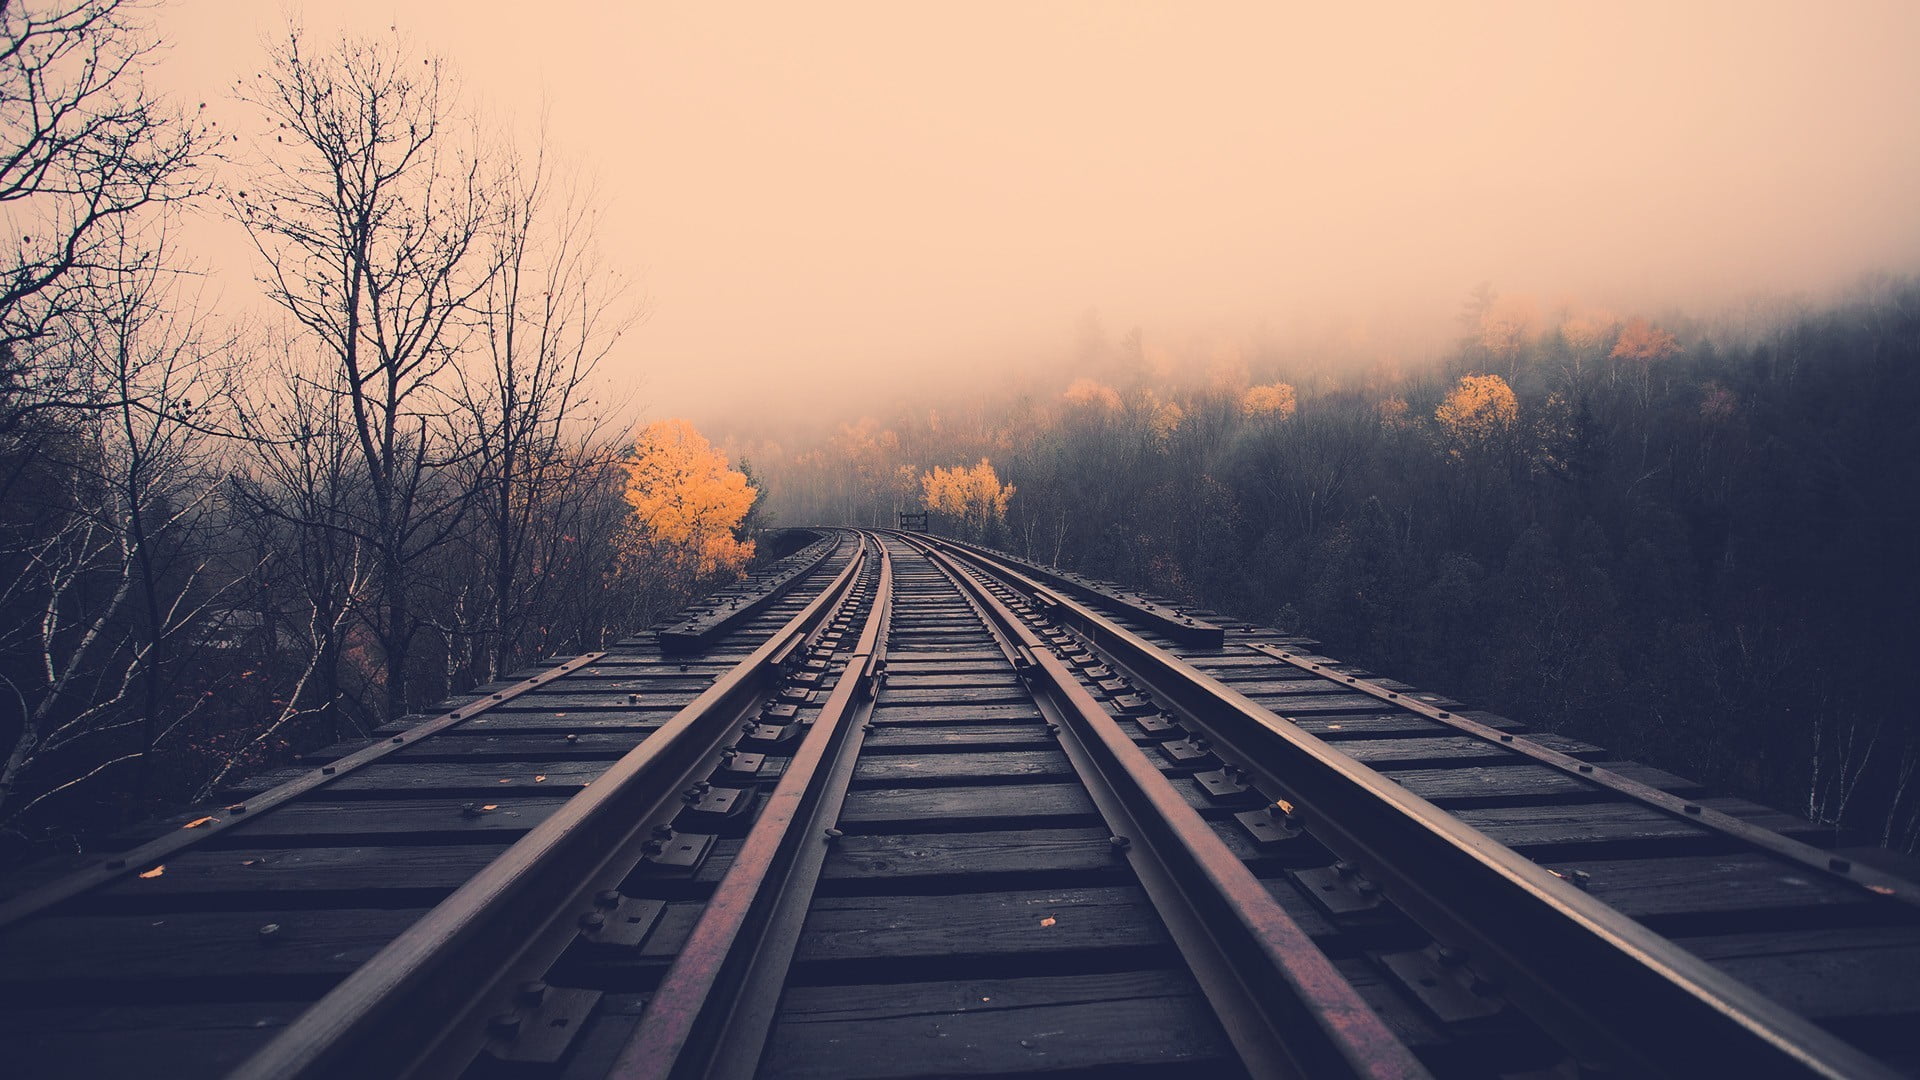 brown and red train rails, railway, landscape, dusk, trees, fall